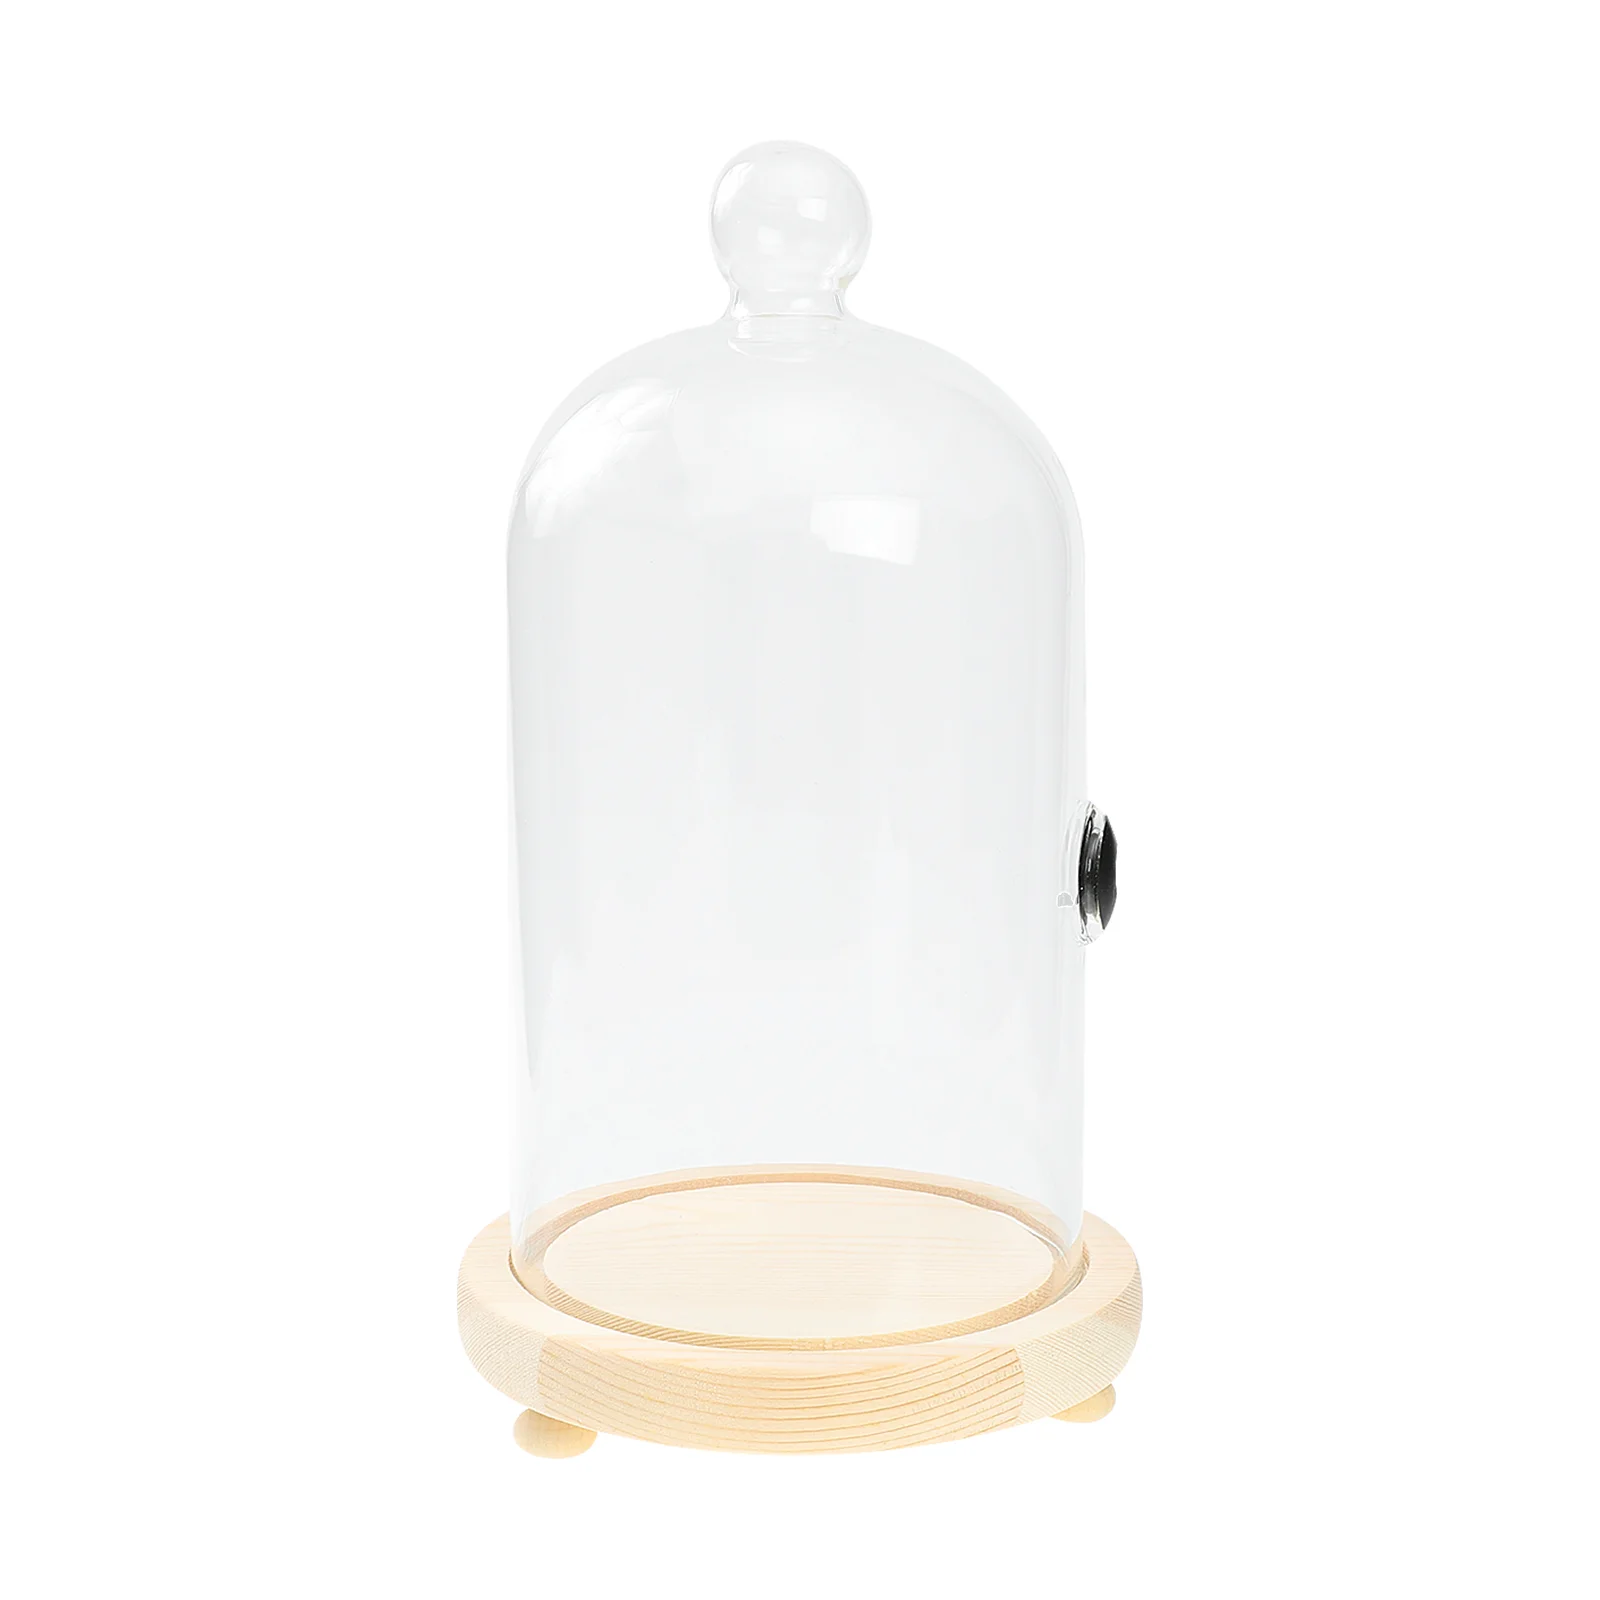 

Dome Cover Cloche Glasscake Display Smoker Infuser Dessert Cocktail Lid Bell Jar Stand Plate Tray Cuisinecupcake Serving Clear